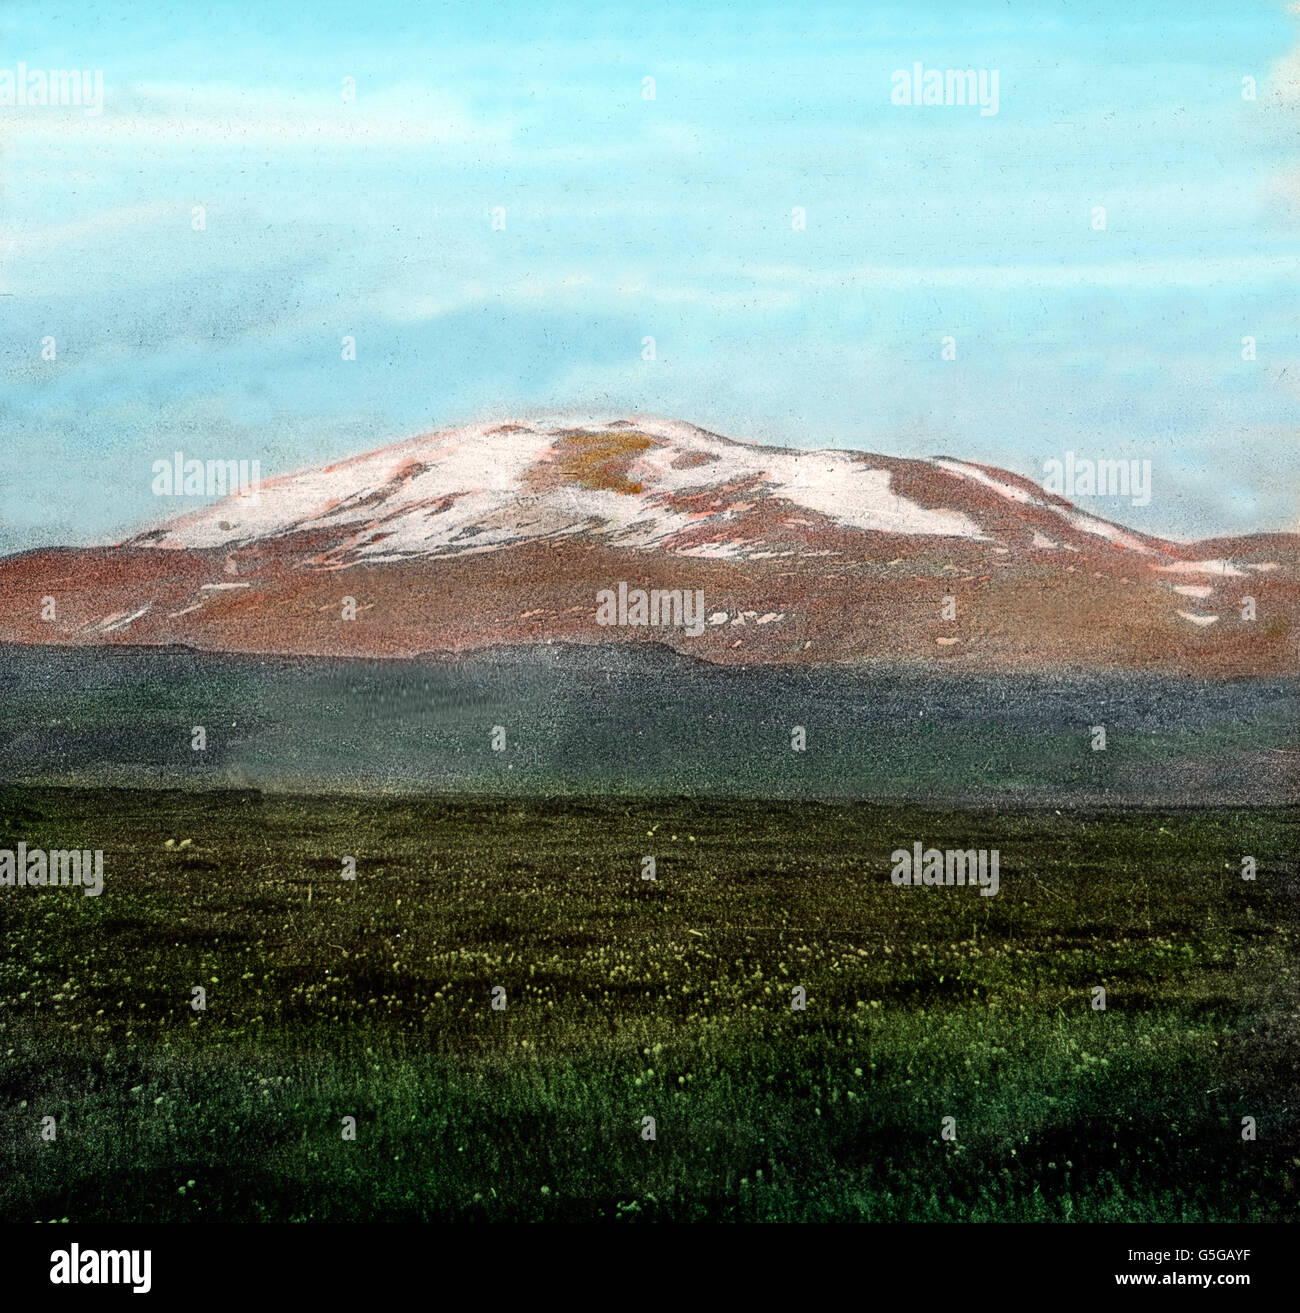 Der Vulkan Hekla auf Island. Hekla volcano on Iceland. morth. northern, mountain, volcano, landscape, nature, meadow, volcanicity, volcanism, geology, history, historical, 1910s, 1920s, 20th century, archive, Carl Simon, hand-coloured glass slide Stock Photo